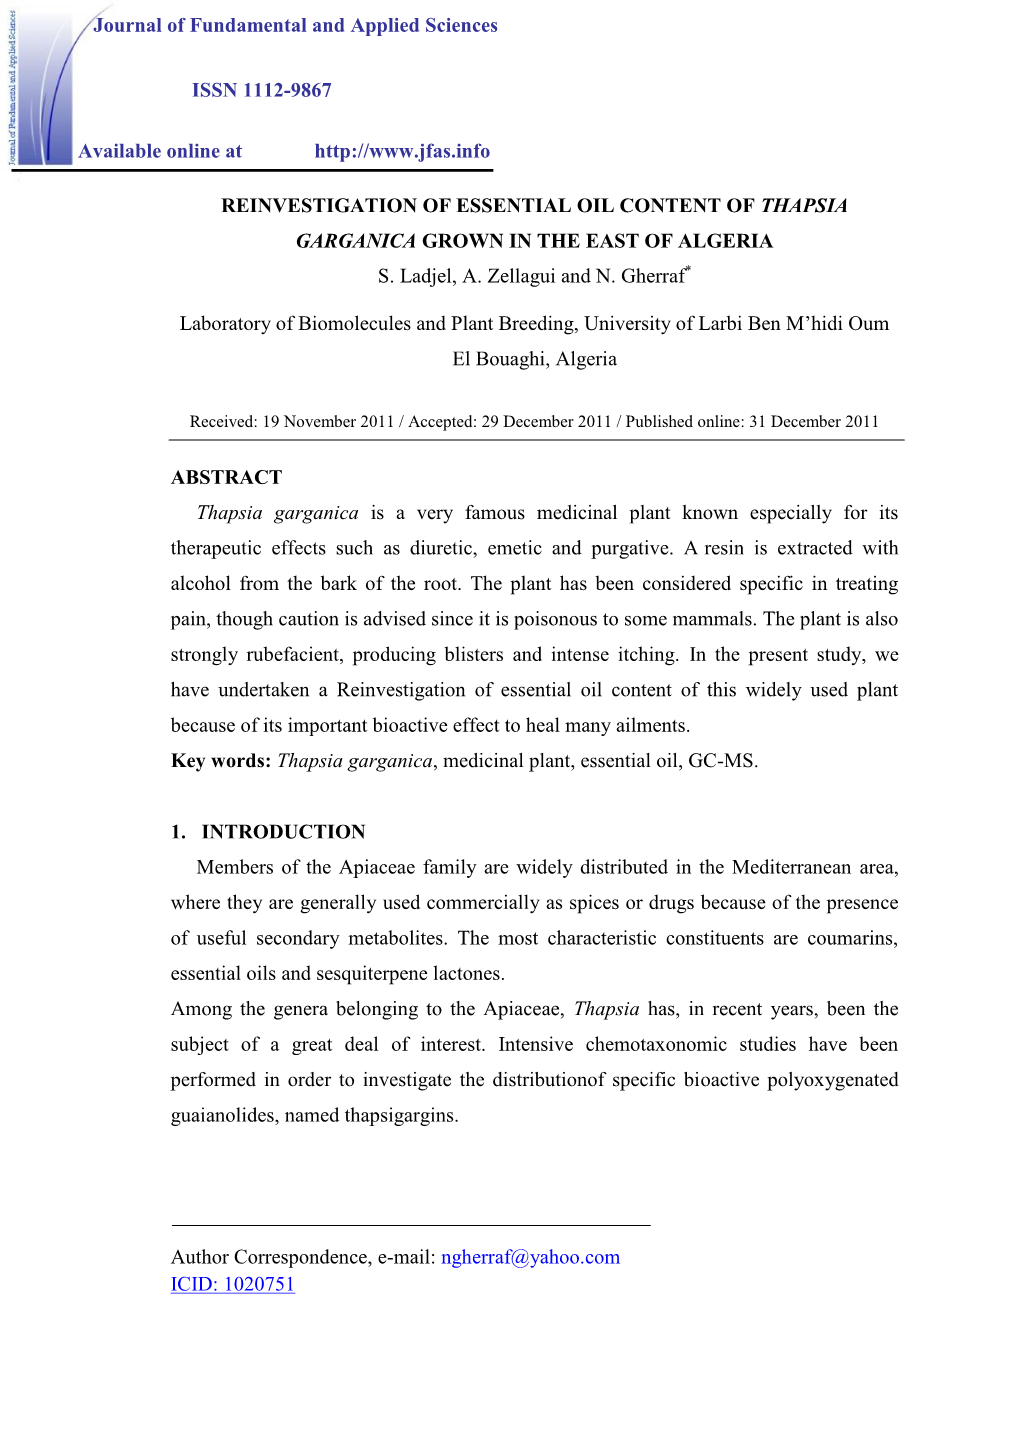 Reinvestigation of Essential Oil Content of Thapsia Garganica Grown in the East of Algeria S